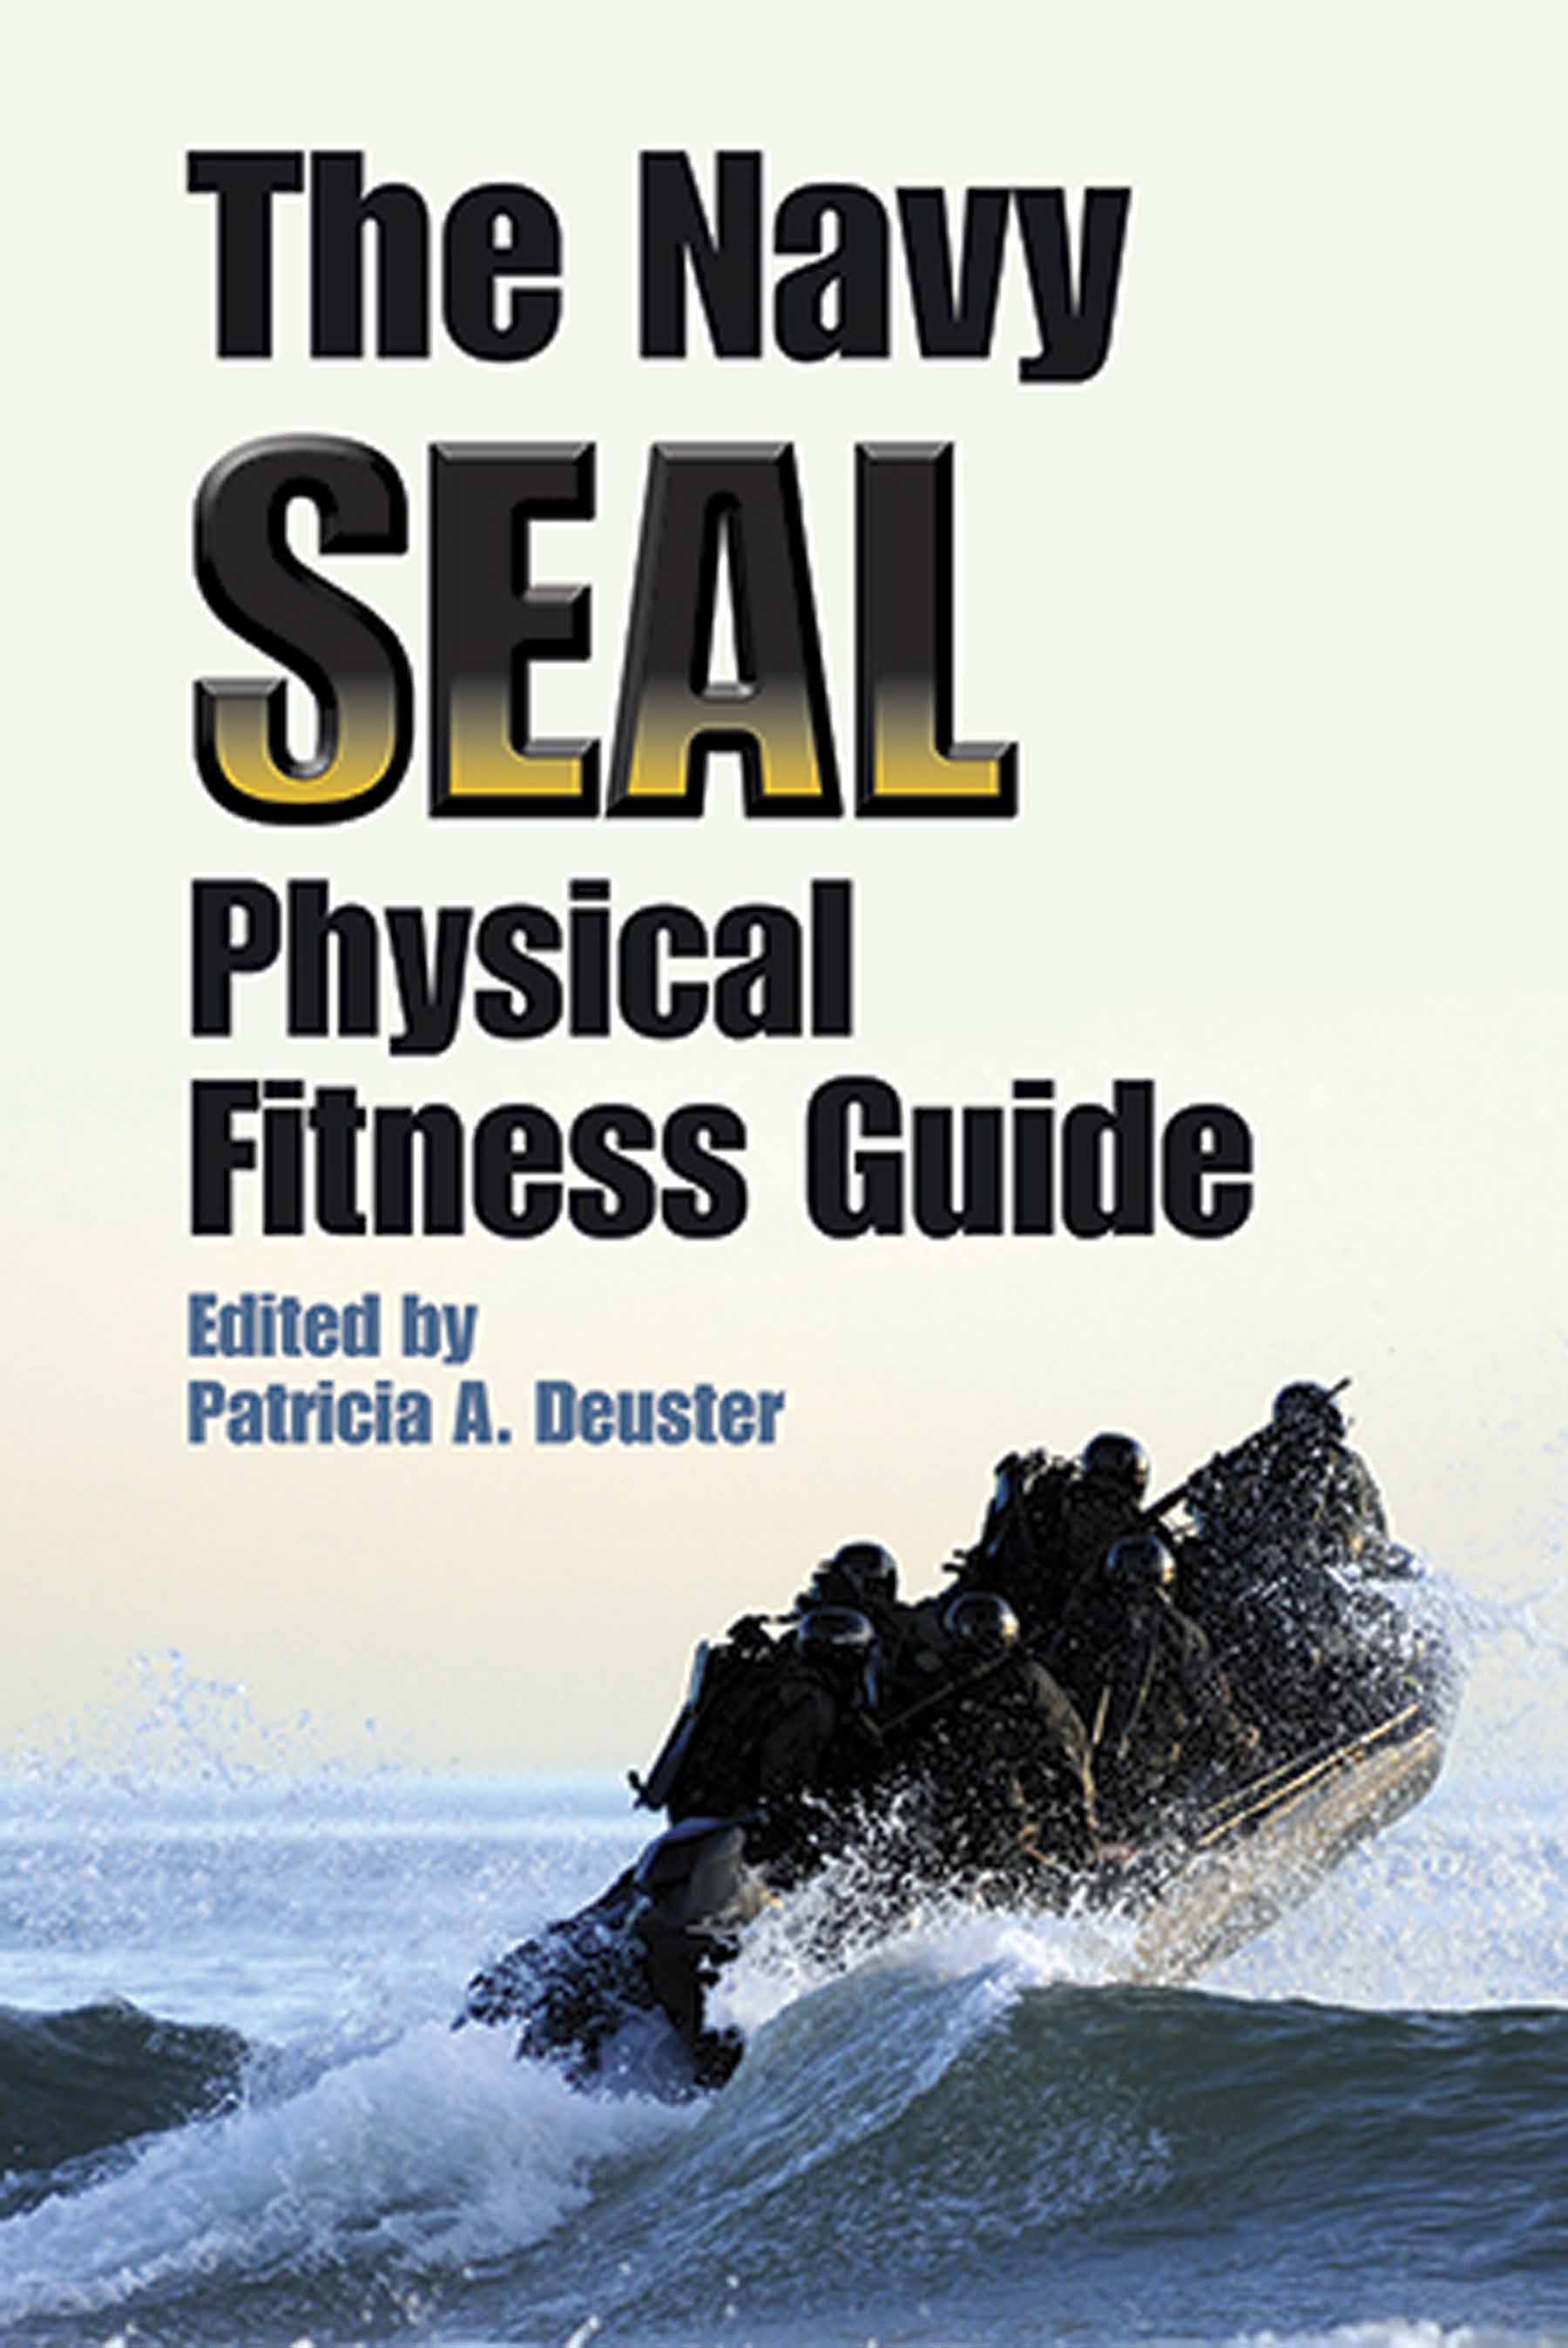 The Navy SEAL Physical Fitness Guide (Paperback) - image 1 of 1